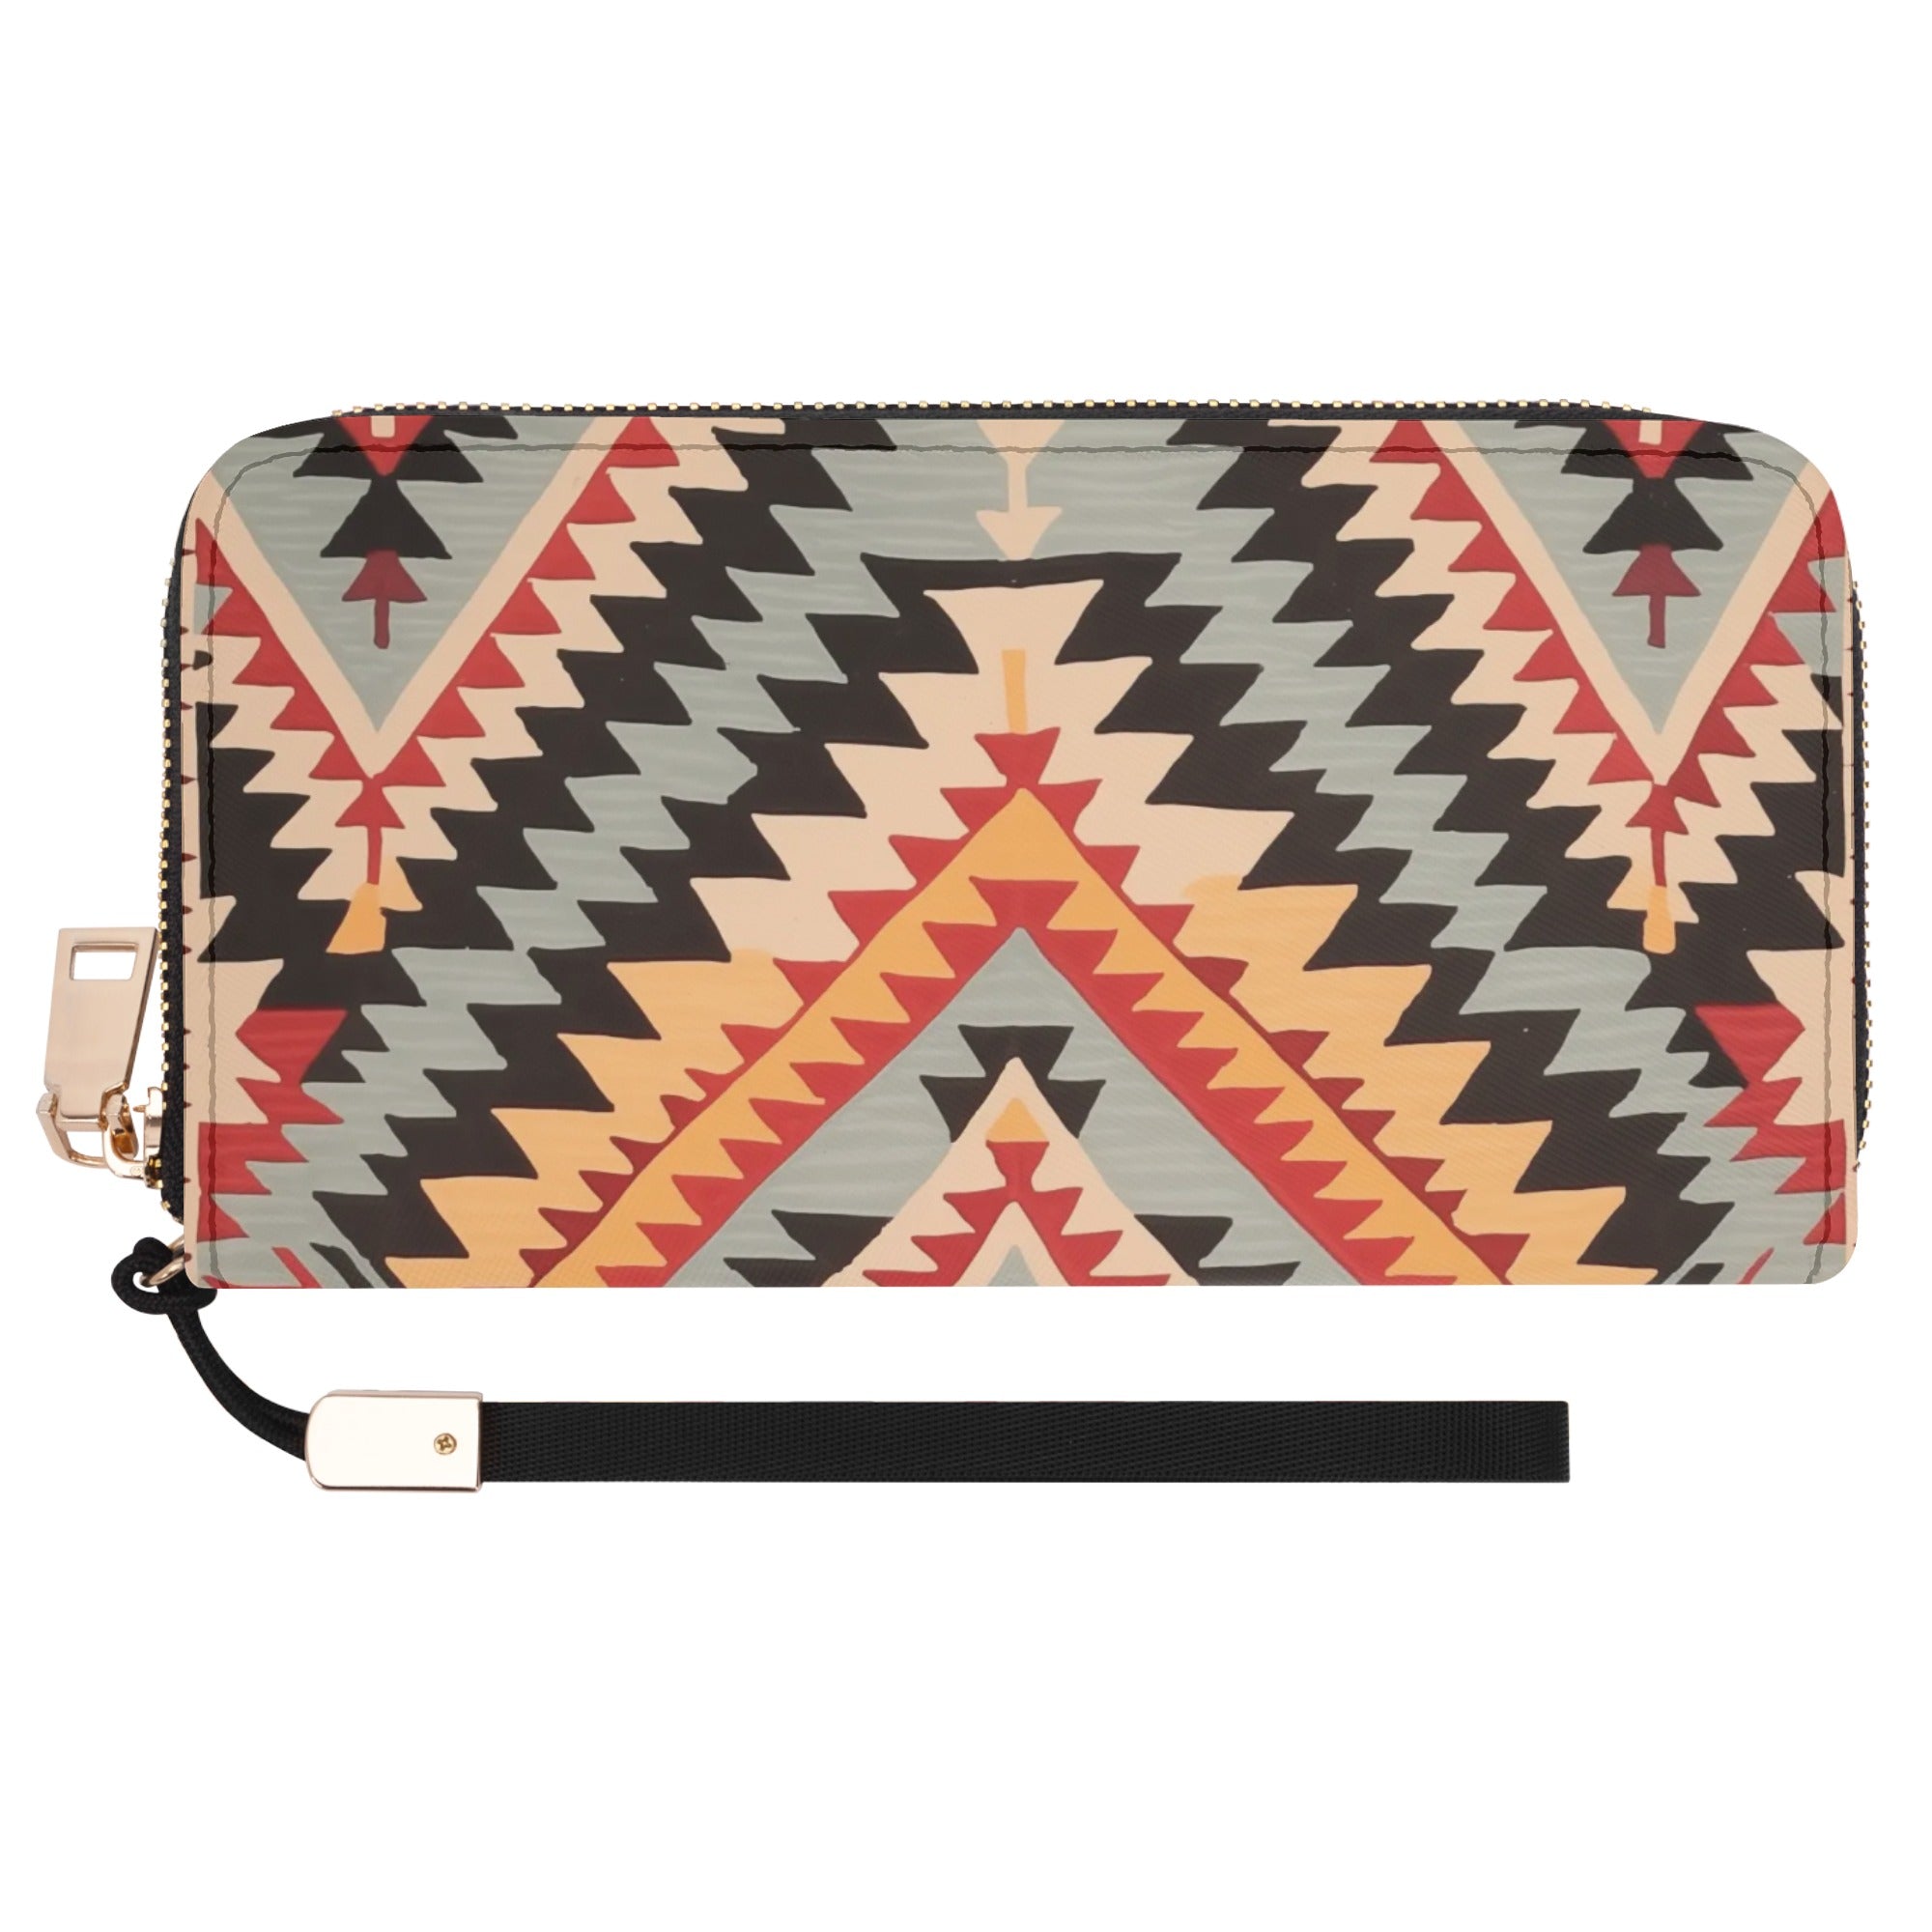 Tribal-Inspired Durable Wallet